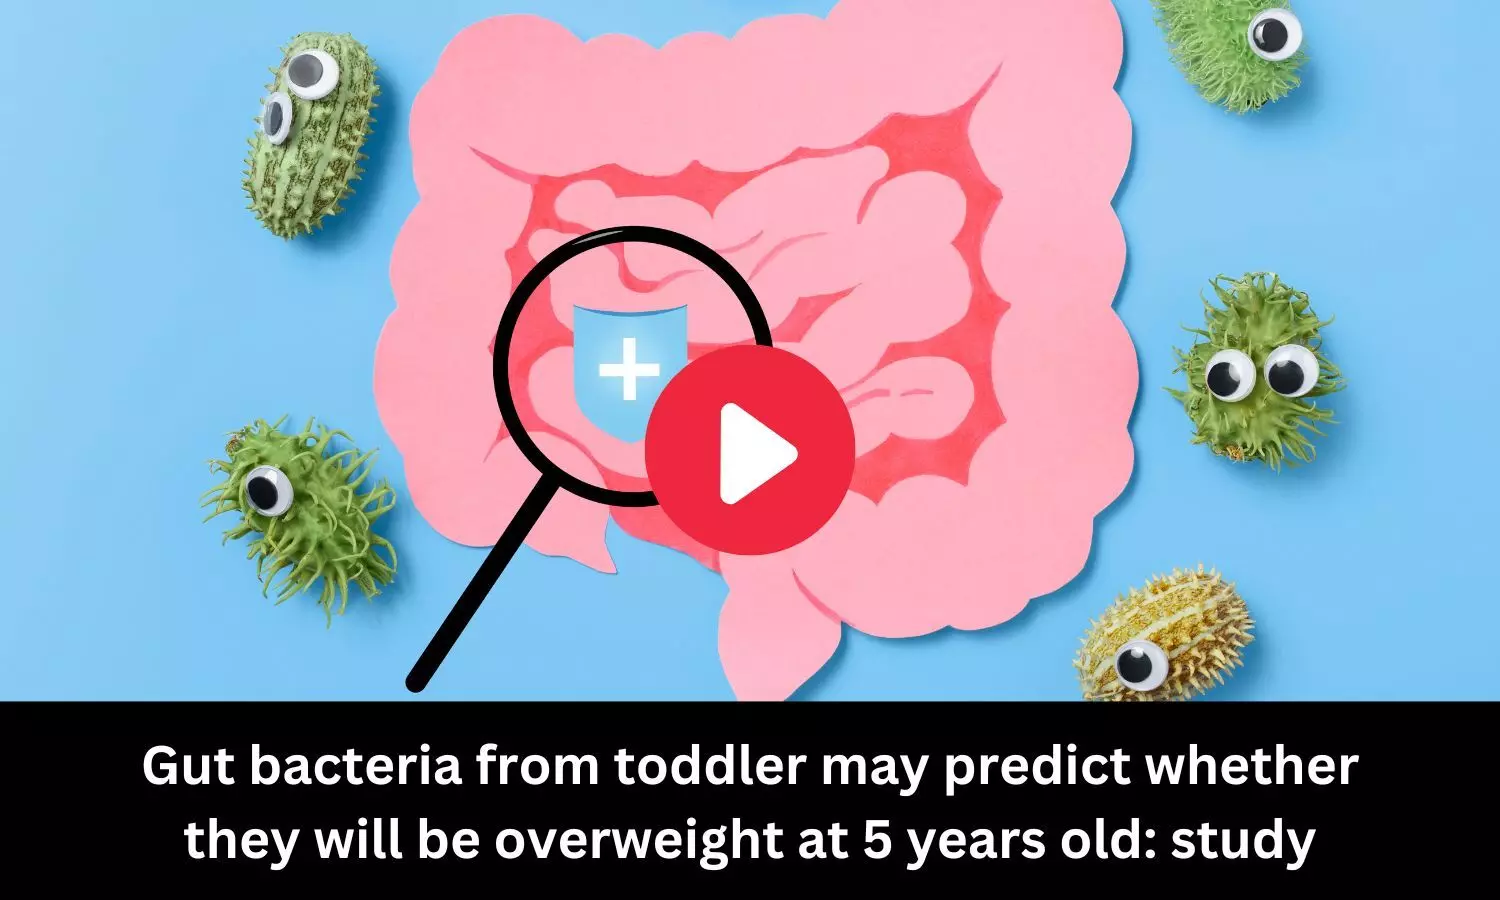 Gut bacteria from toddler may predict whether they will be overweight at 5 years old: study